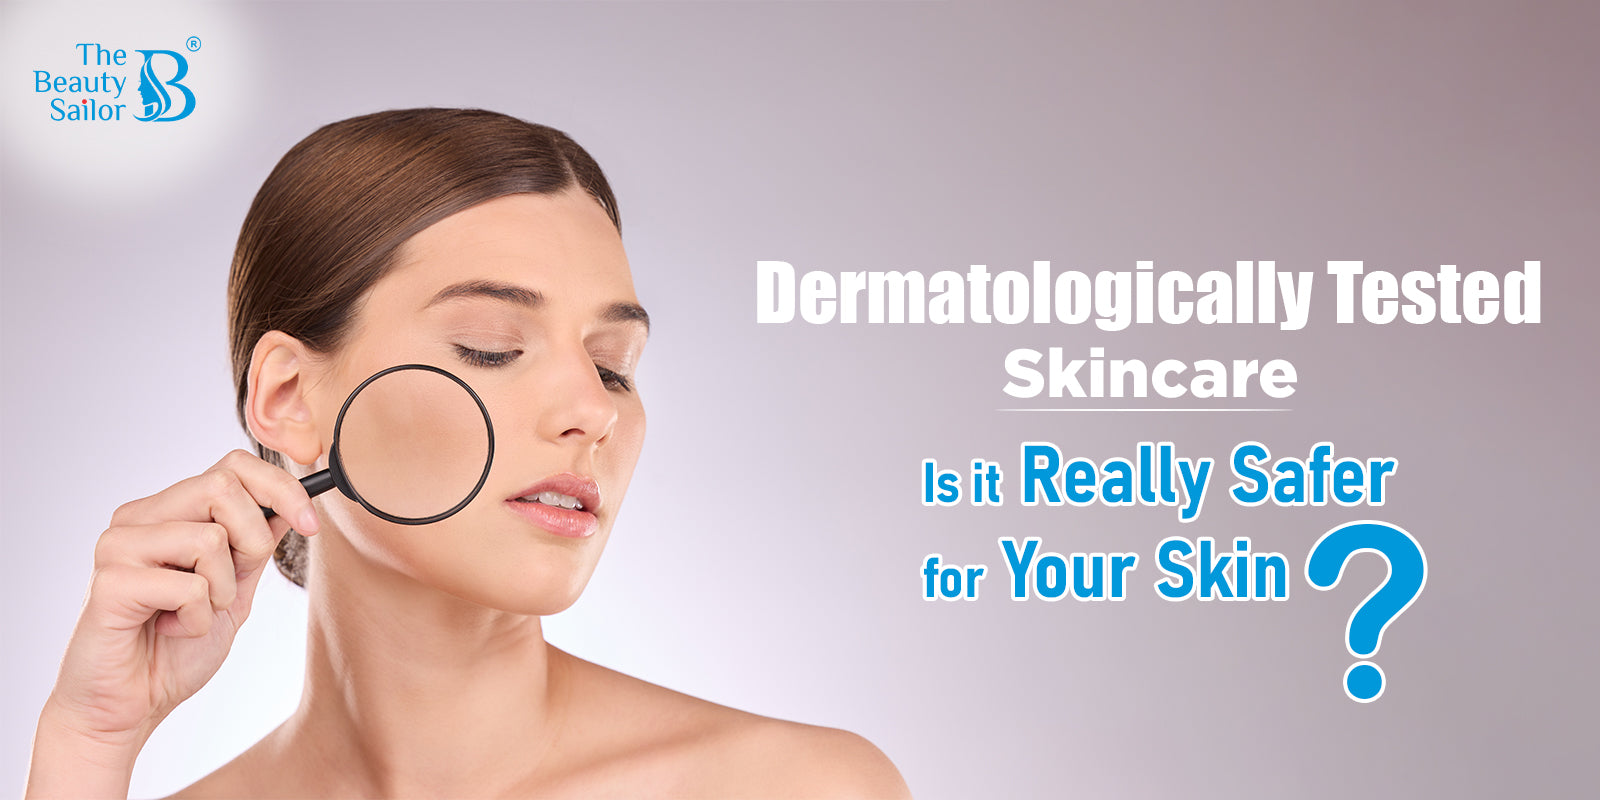 Dermatologically Tested Skincare: Is it Really Safer for Your Skin?